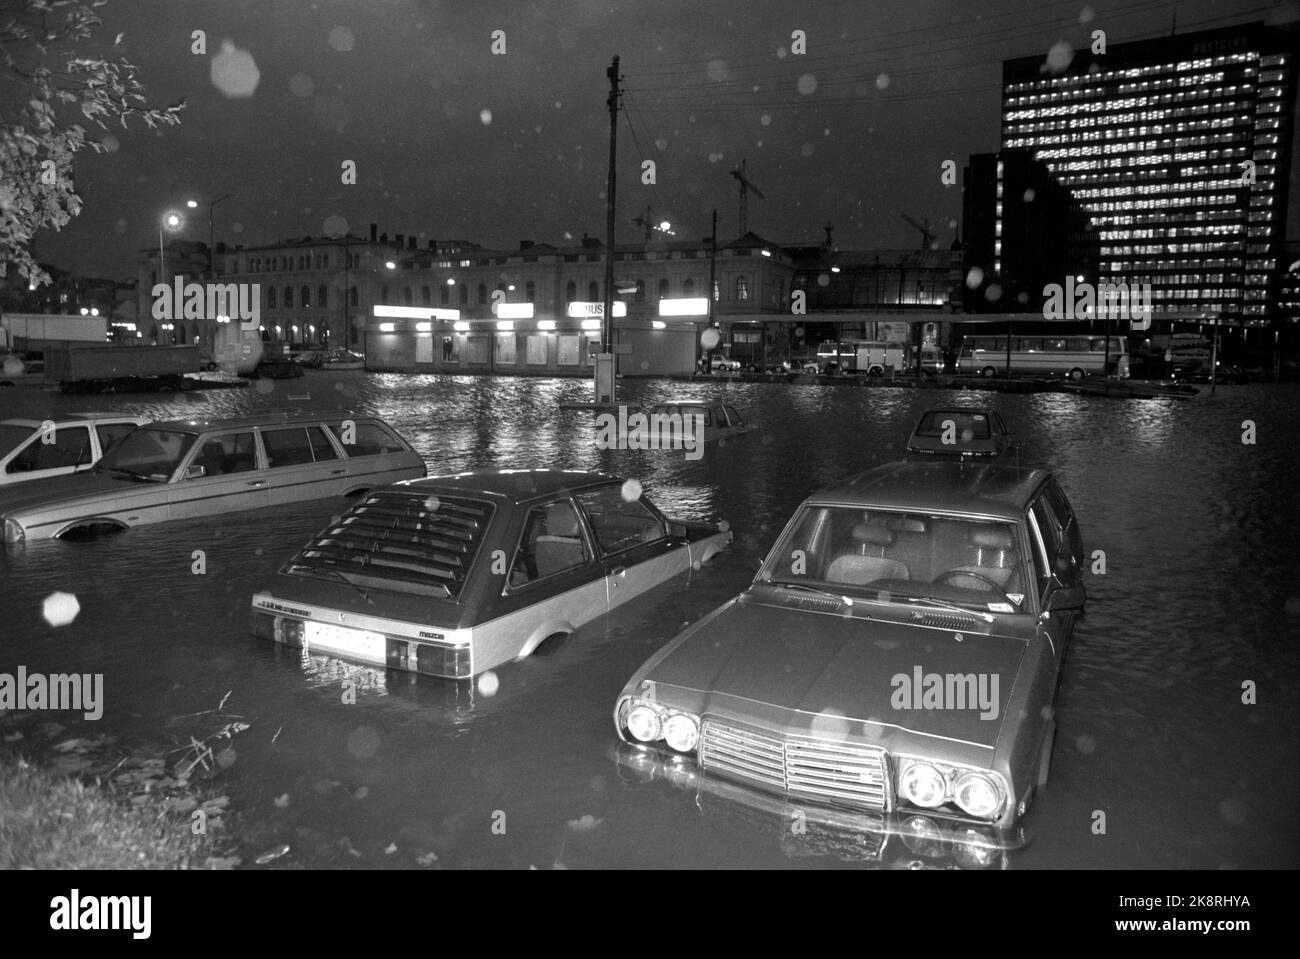 Oslo 1987-10-16: Storm in southern Norway. The worst storm in man's memory affects southern Norway. The storm creates more than 1.5m higher water levels in the harbor pool in Oslo and creates floods in parts of the center. In the Skiensfjord, timber comes to a value of NOK 8 million in operation. At the car port in Drammen, many new cars are so damaged that they do not become marketable. Picture: Parked cars in the new 'lake' which was previously a parking lot on the sea side of Oslo Central Station. Back to h. The postal germination. Photo: Eystein Hanssen Stock Photo